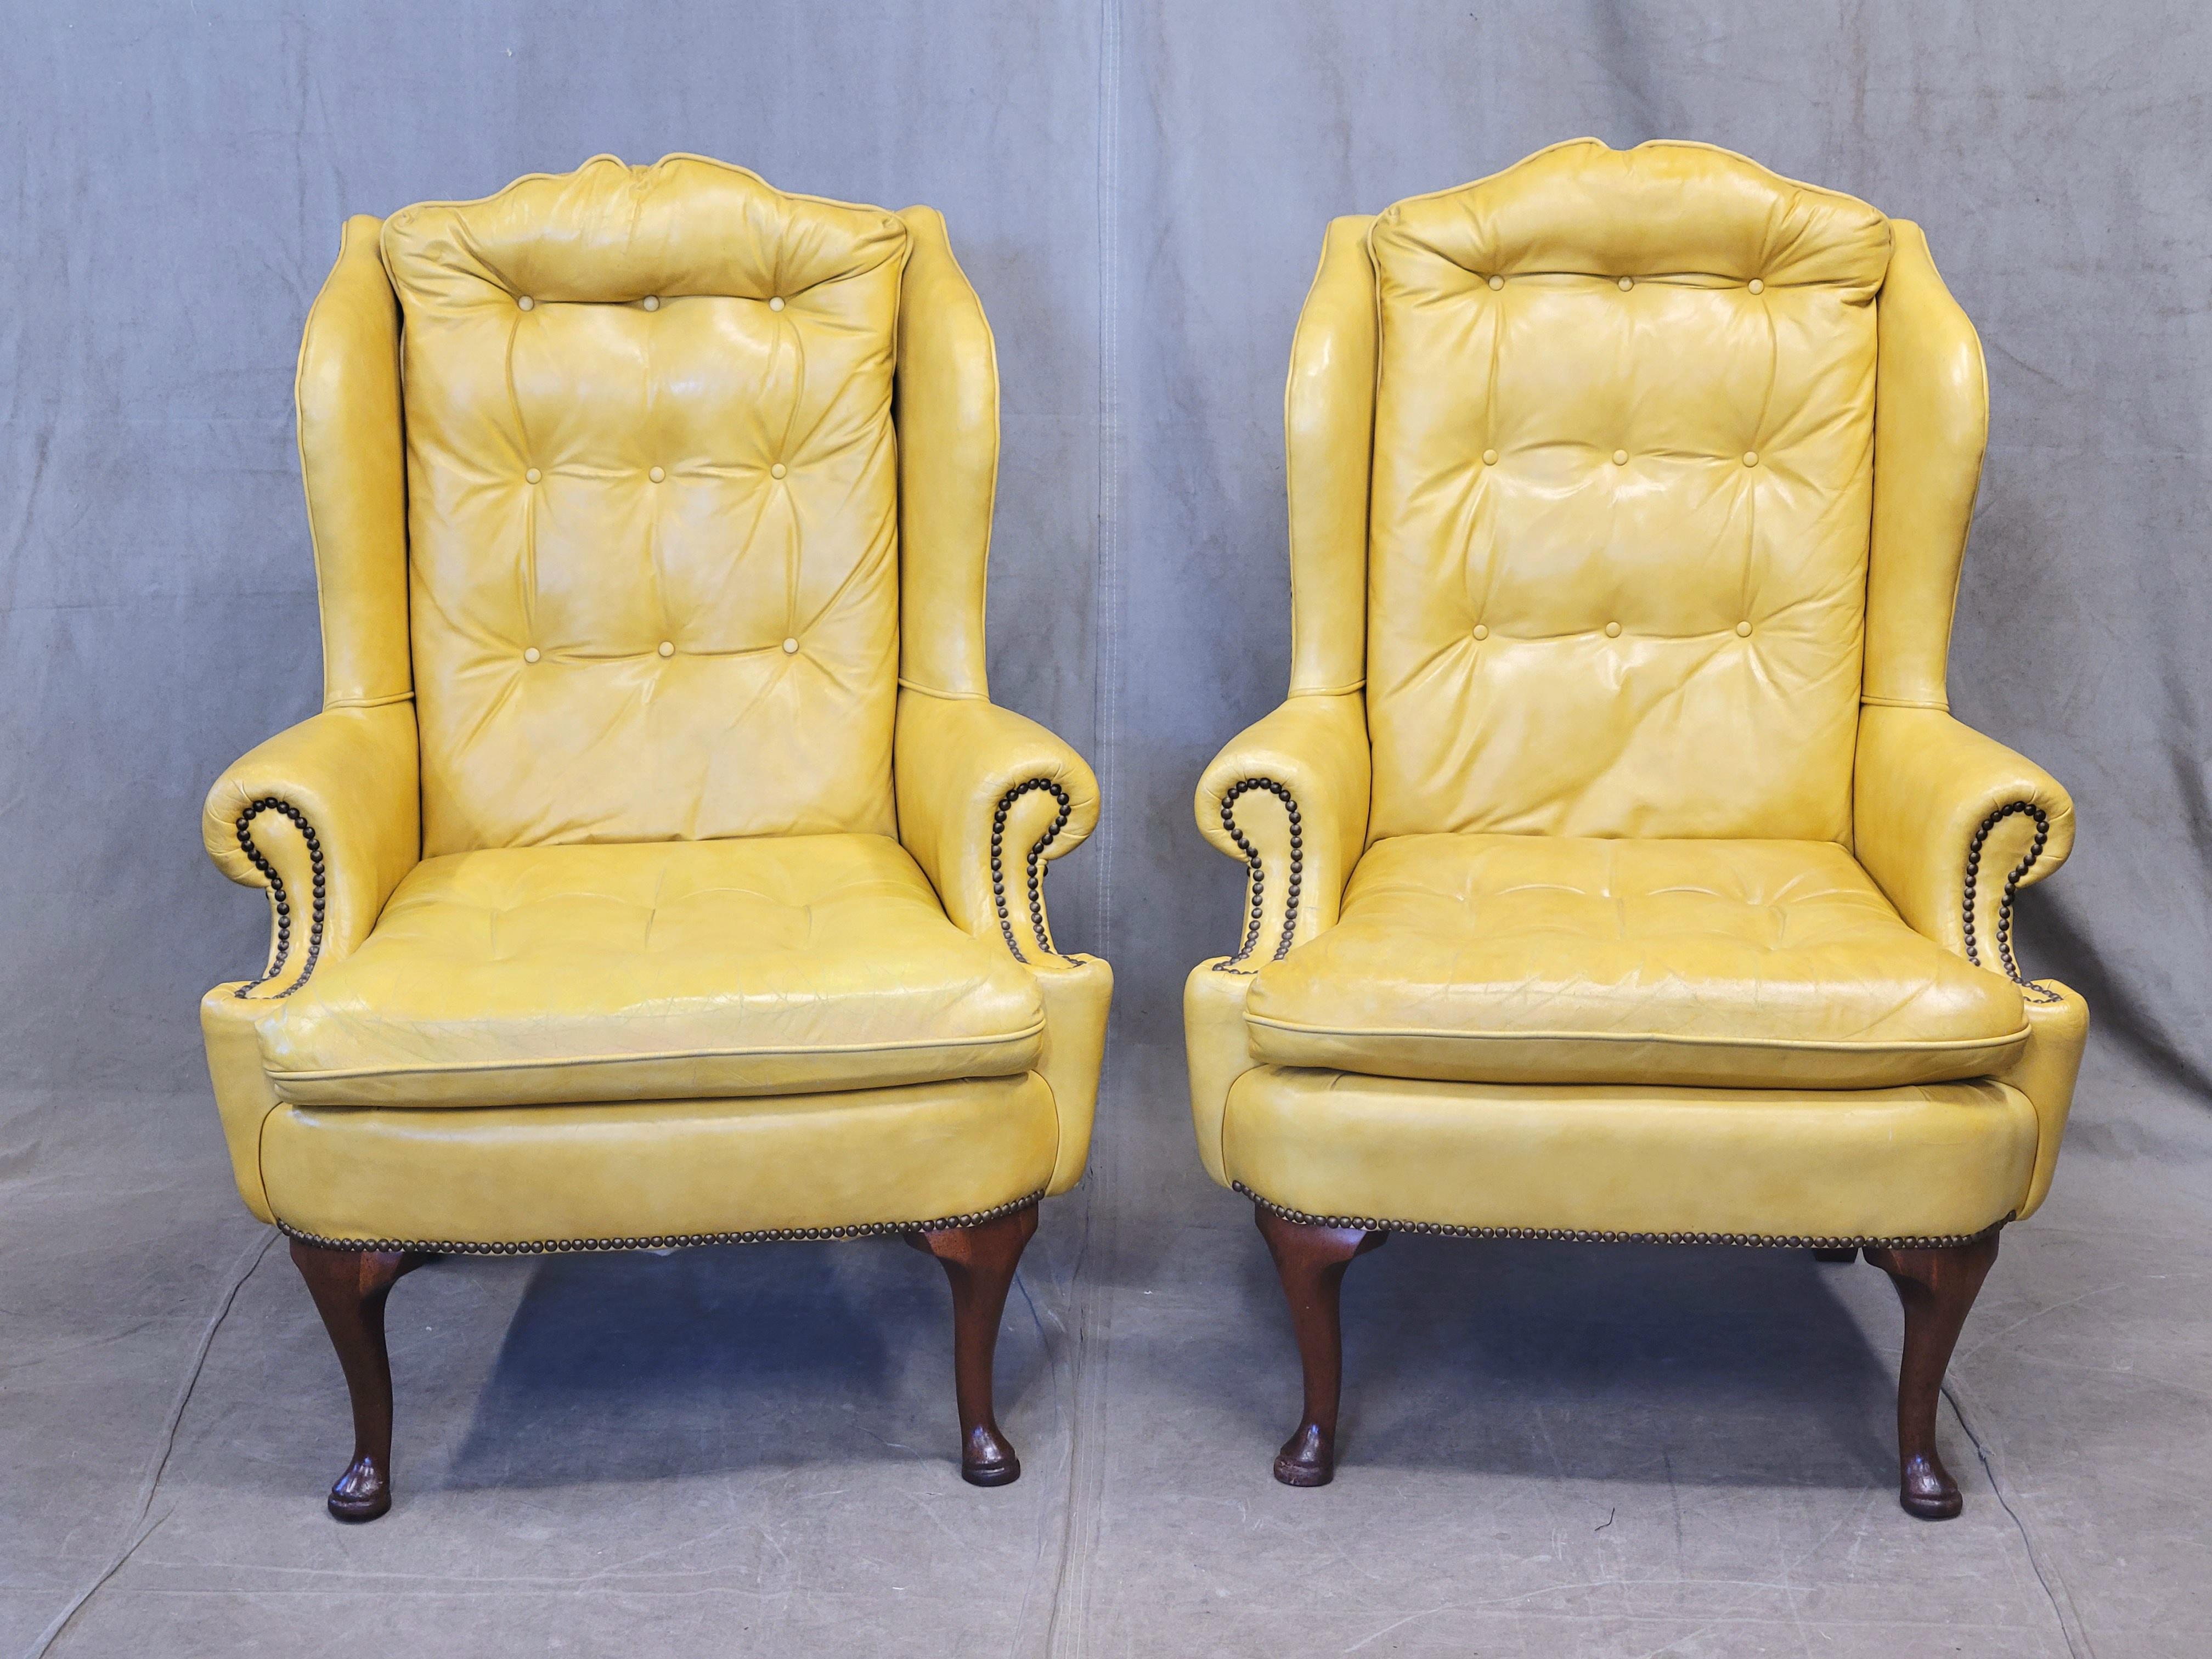 A gorgeous pair of vintage yellow Chesterfield wingback chairs with brass nailheads accompanied by custom black botanical down lumbar pillows. The chairs, likely from the 1970s is made of hide leather and therefore supple and durable after 50 years!